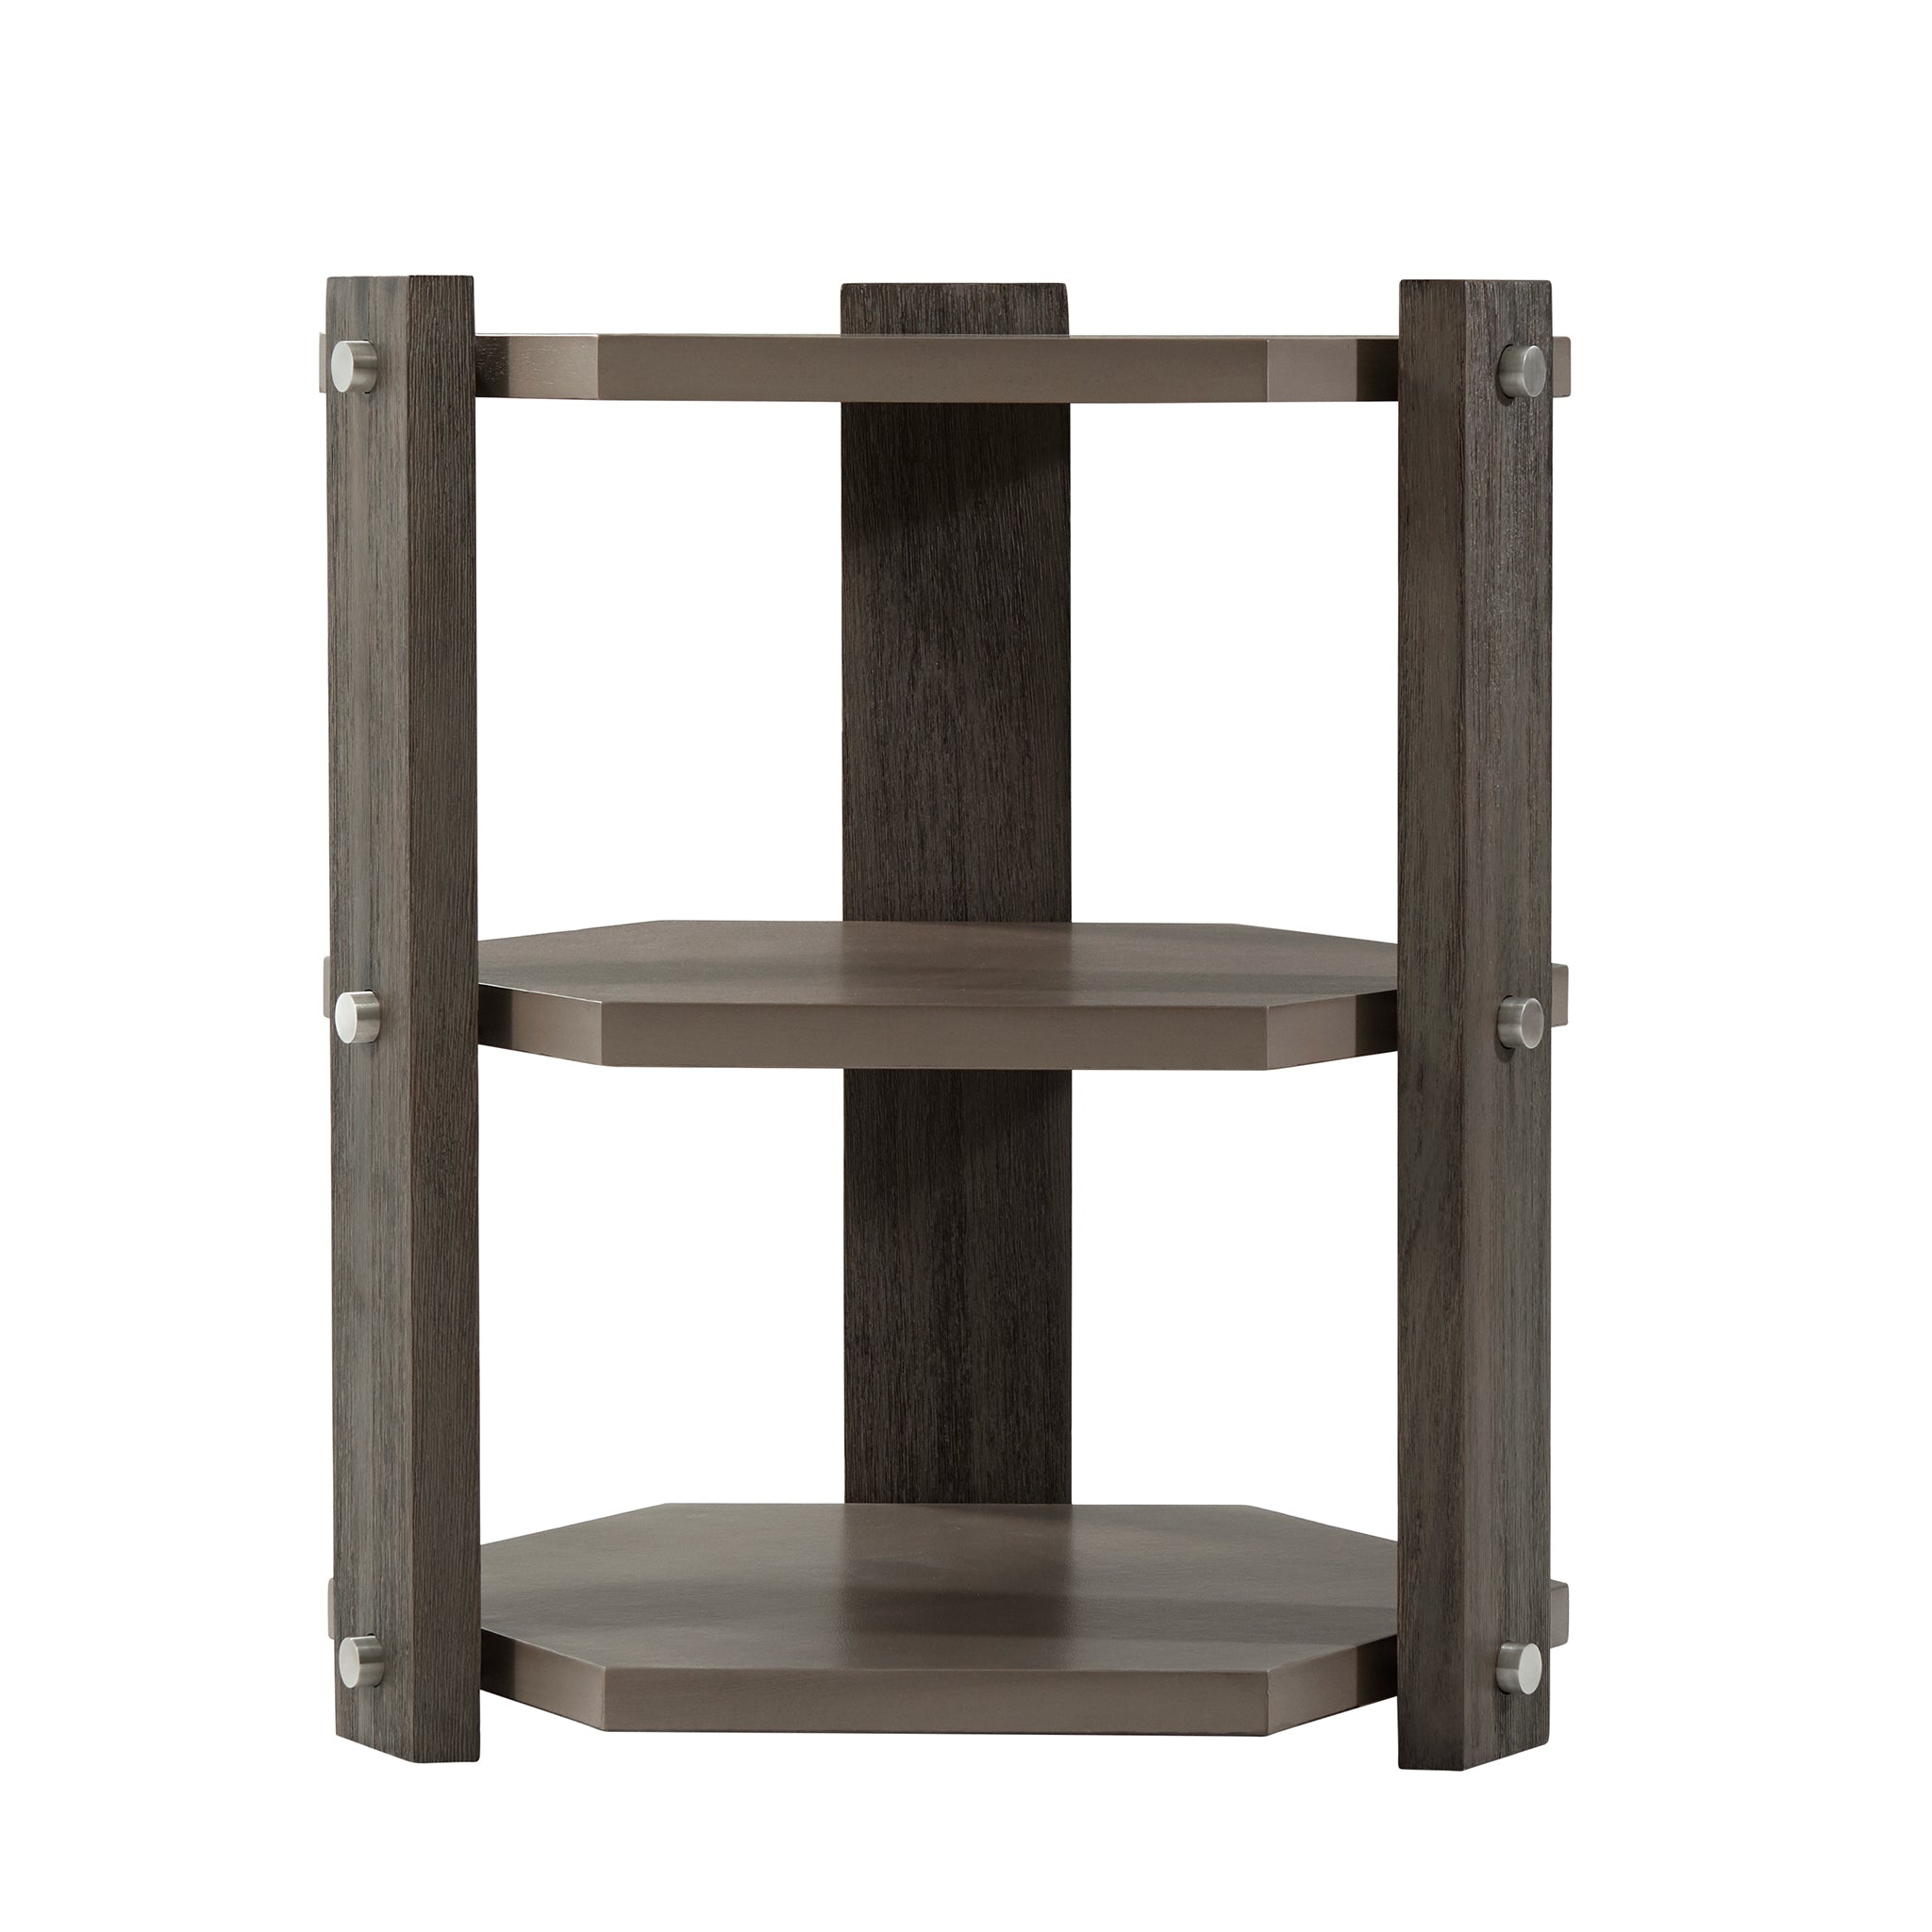 theodore alexander theory hexagonal side table end tables 